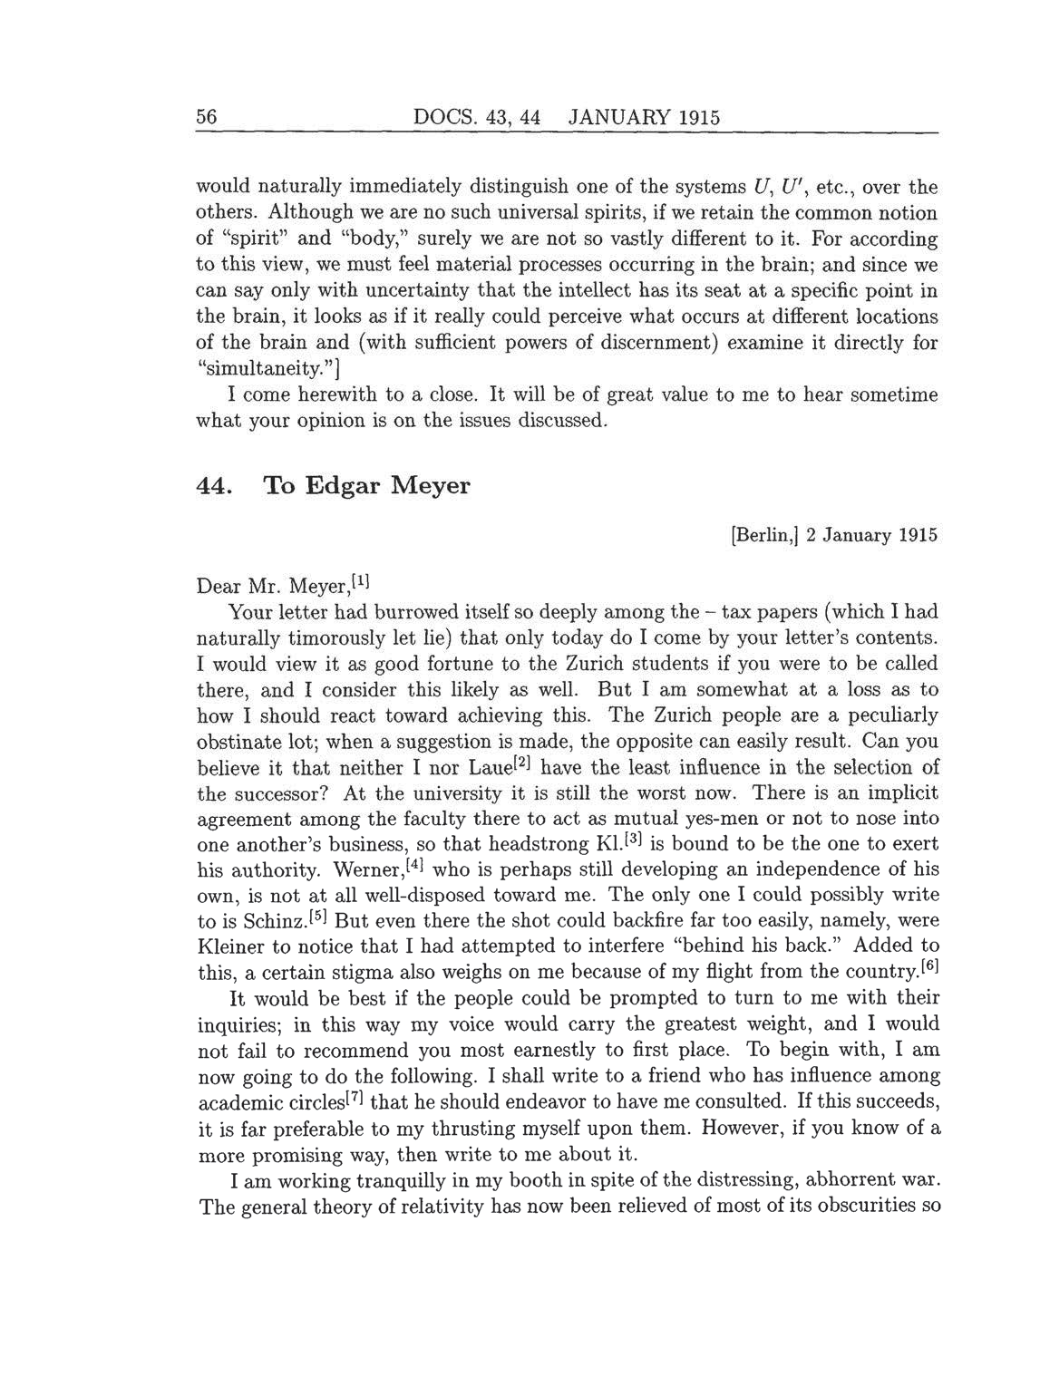 Volume 8: The Berlin Years: Correspondence, 1914-1918 (English translation supplement) page 56